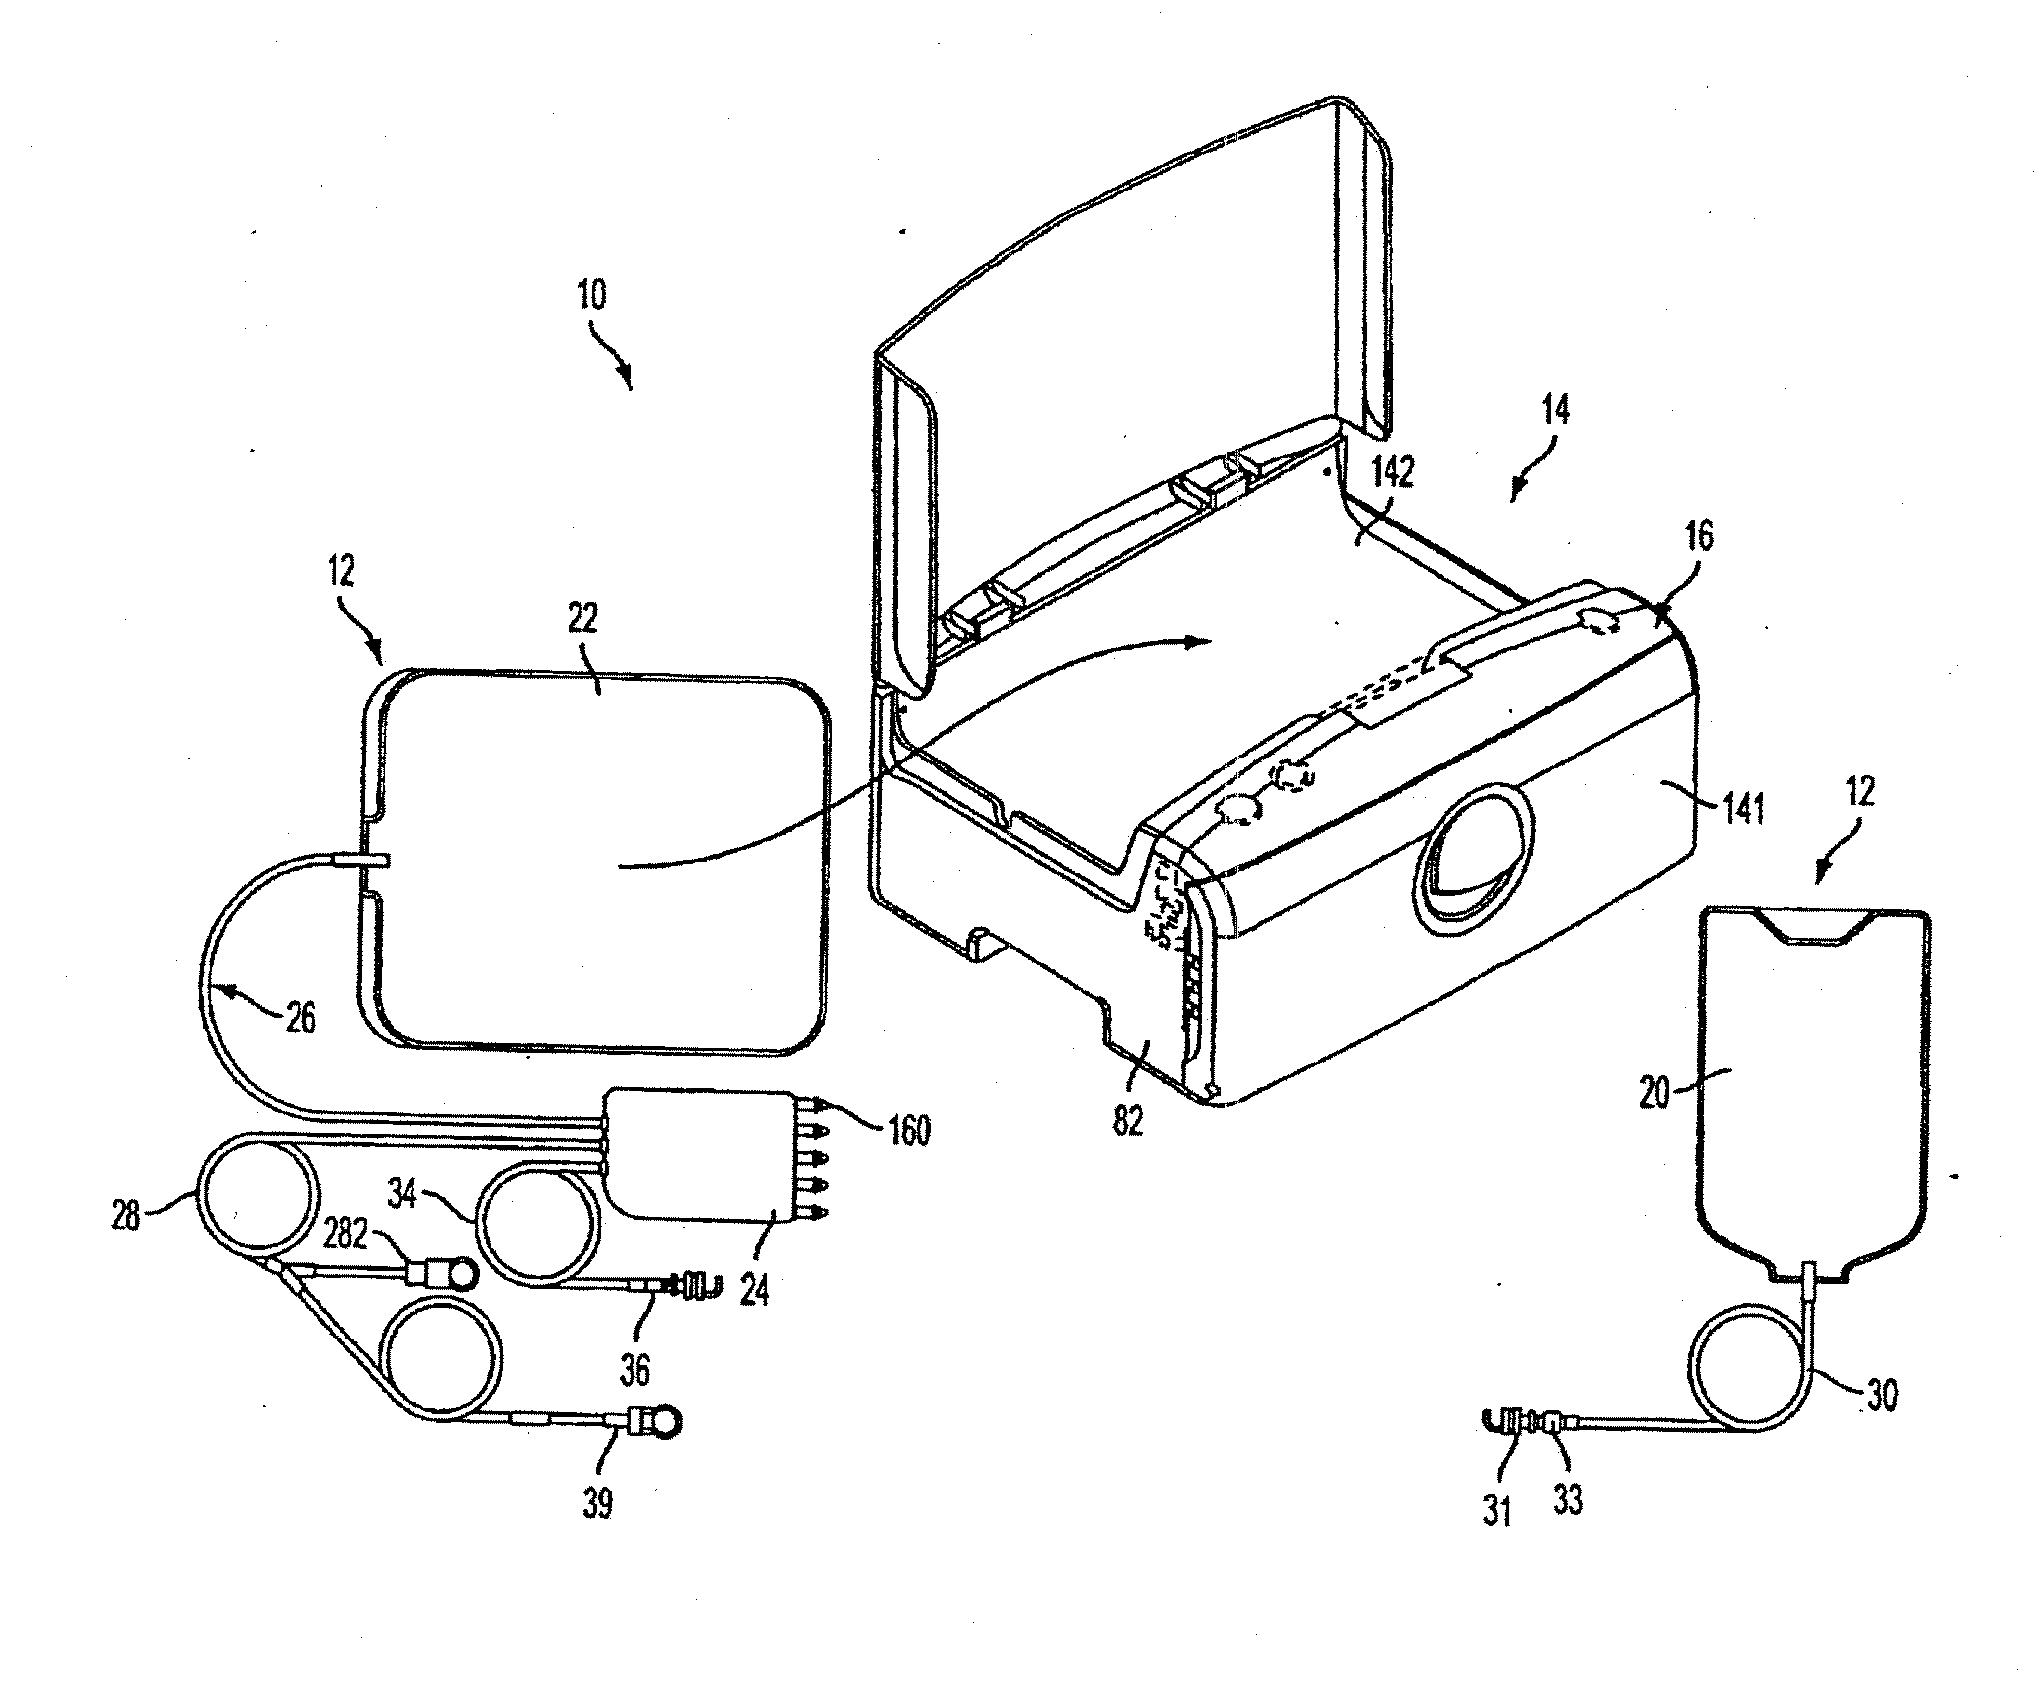 Medical treatment system and methods using a plurality of fluid lines